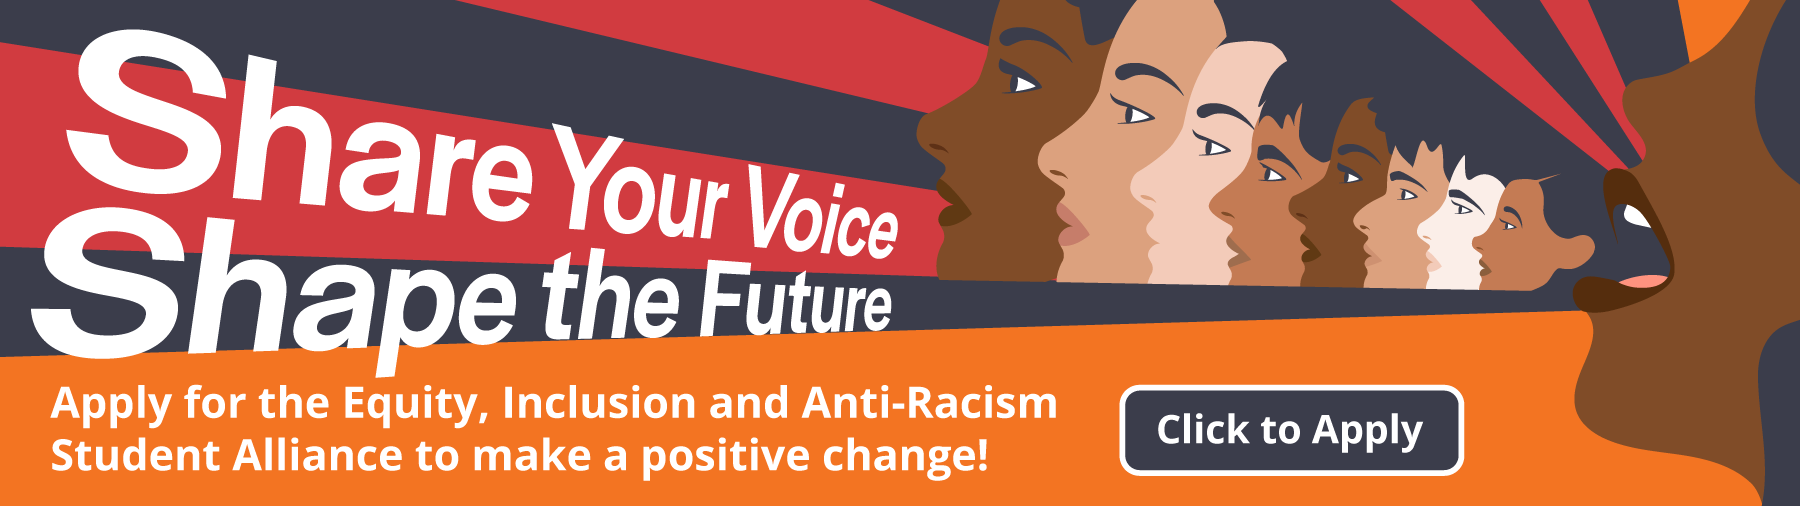 Apply for the Equity, Inclusion and Anti-Racism Student Alliance, 